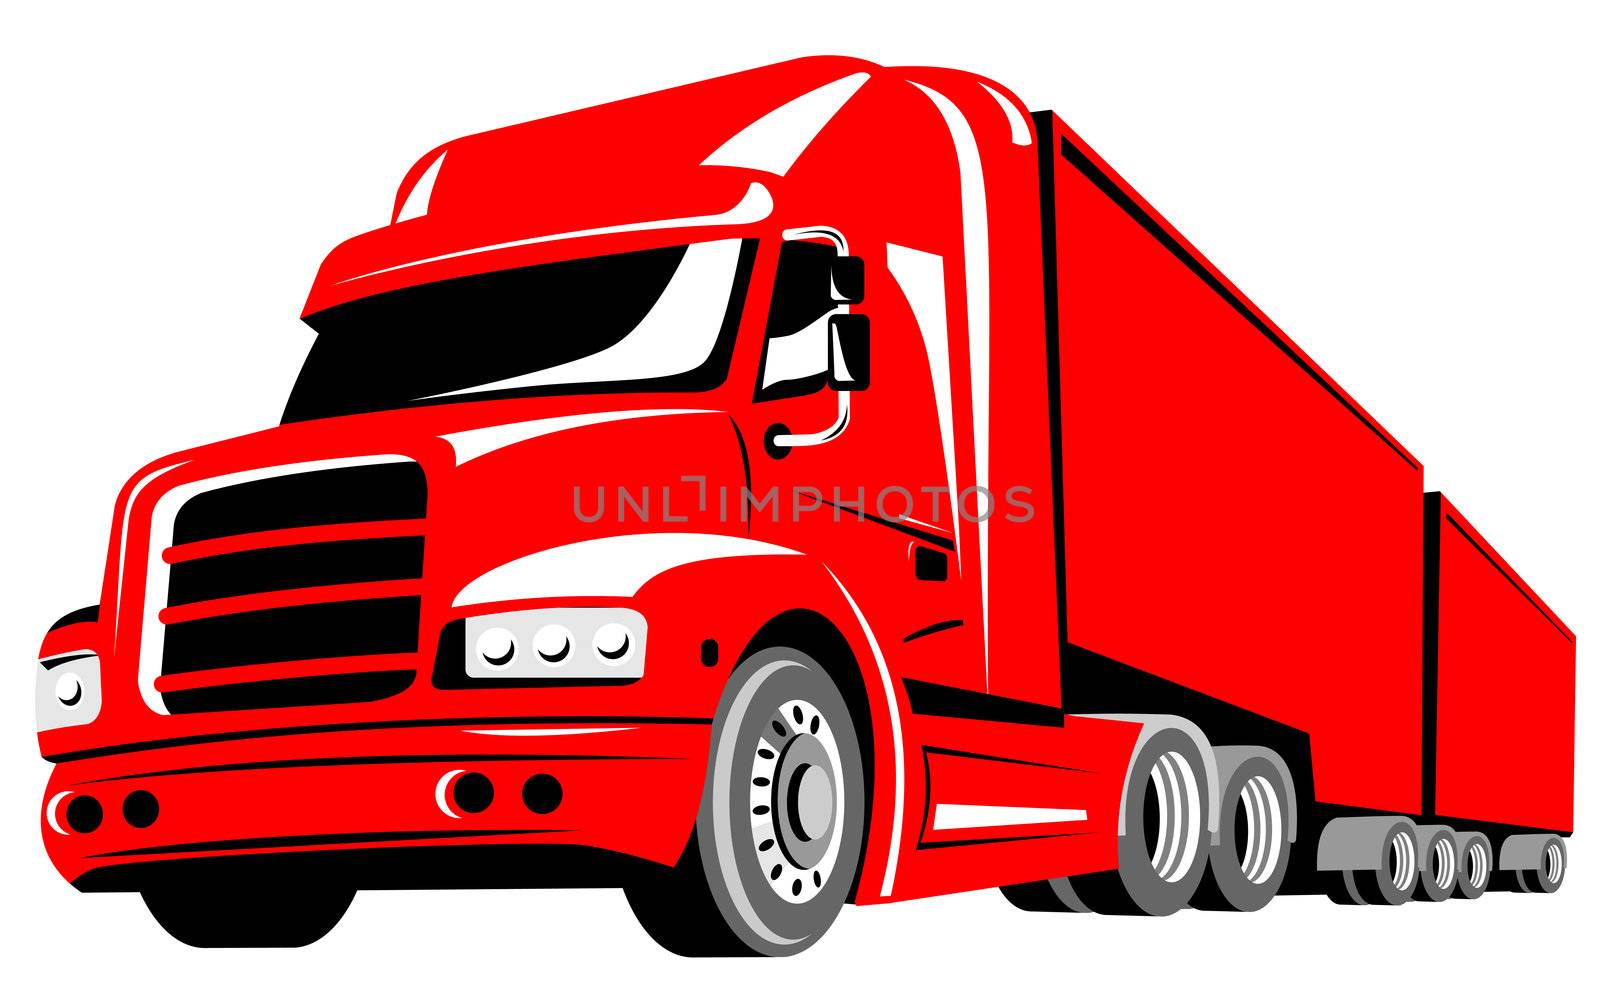 illustration of a container truck lorry done in retro style on isolated background